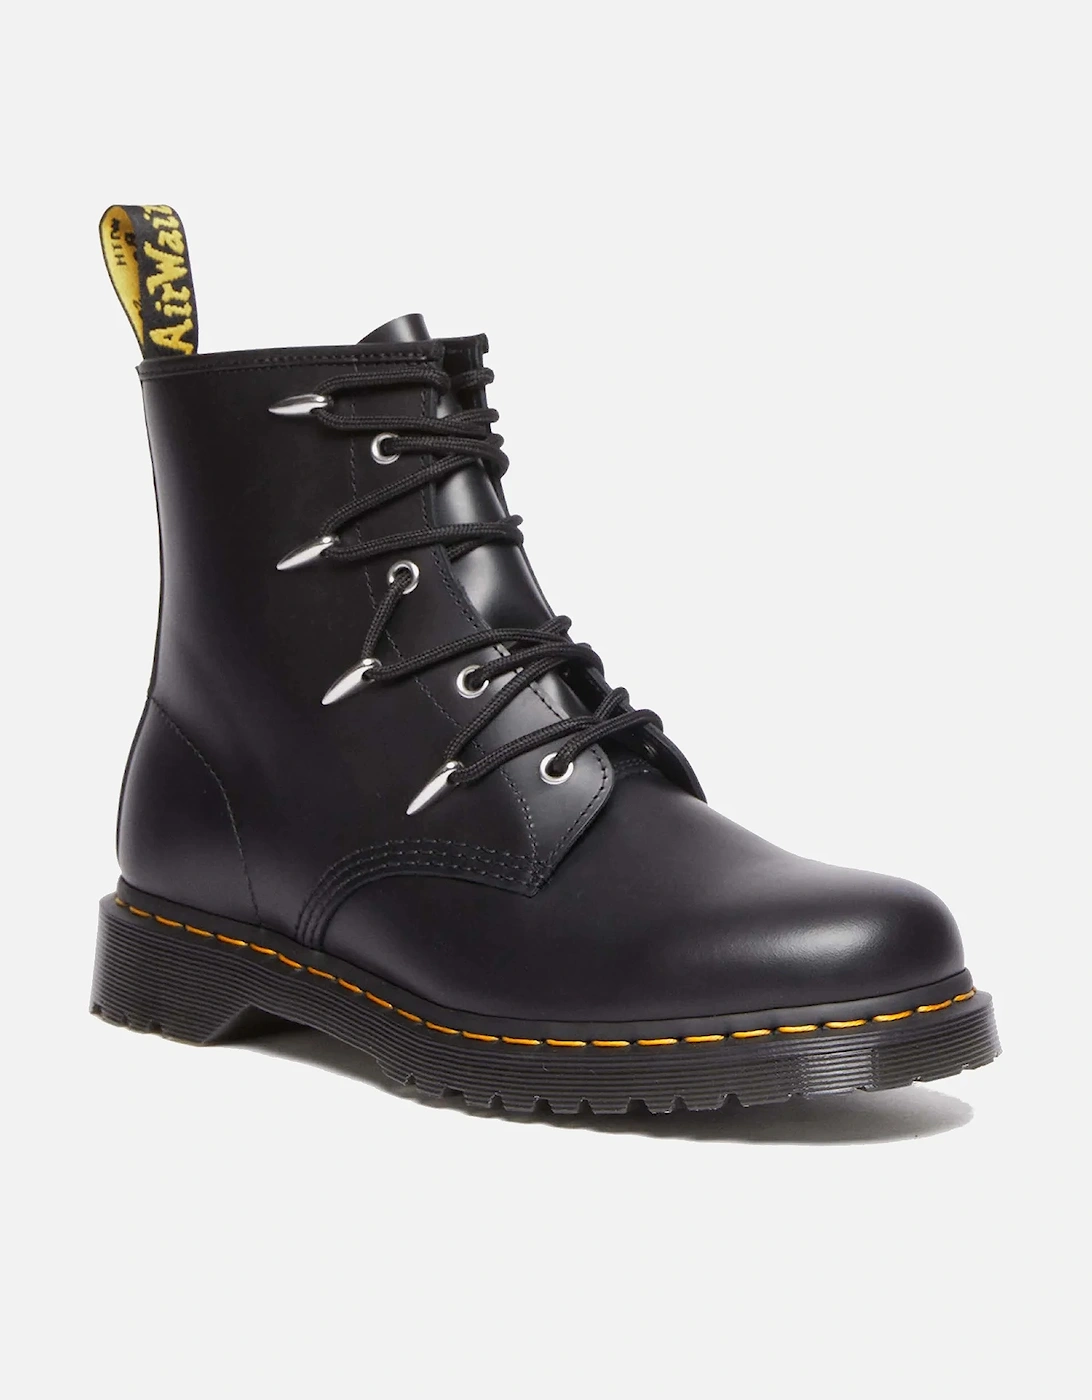 Dr. Martens Women's 1460 Leather 8-Eye Boots - Dr. Martens - Home - Women's Shoes - Women's Boots - Dr. Martens Women's 1460 Leather 8-Eye Boots, 2 of 1